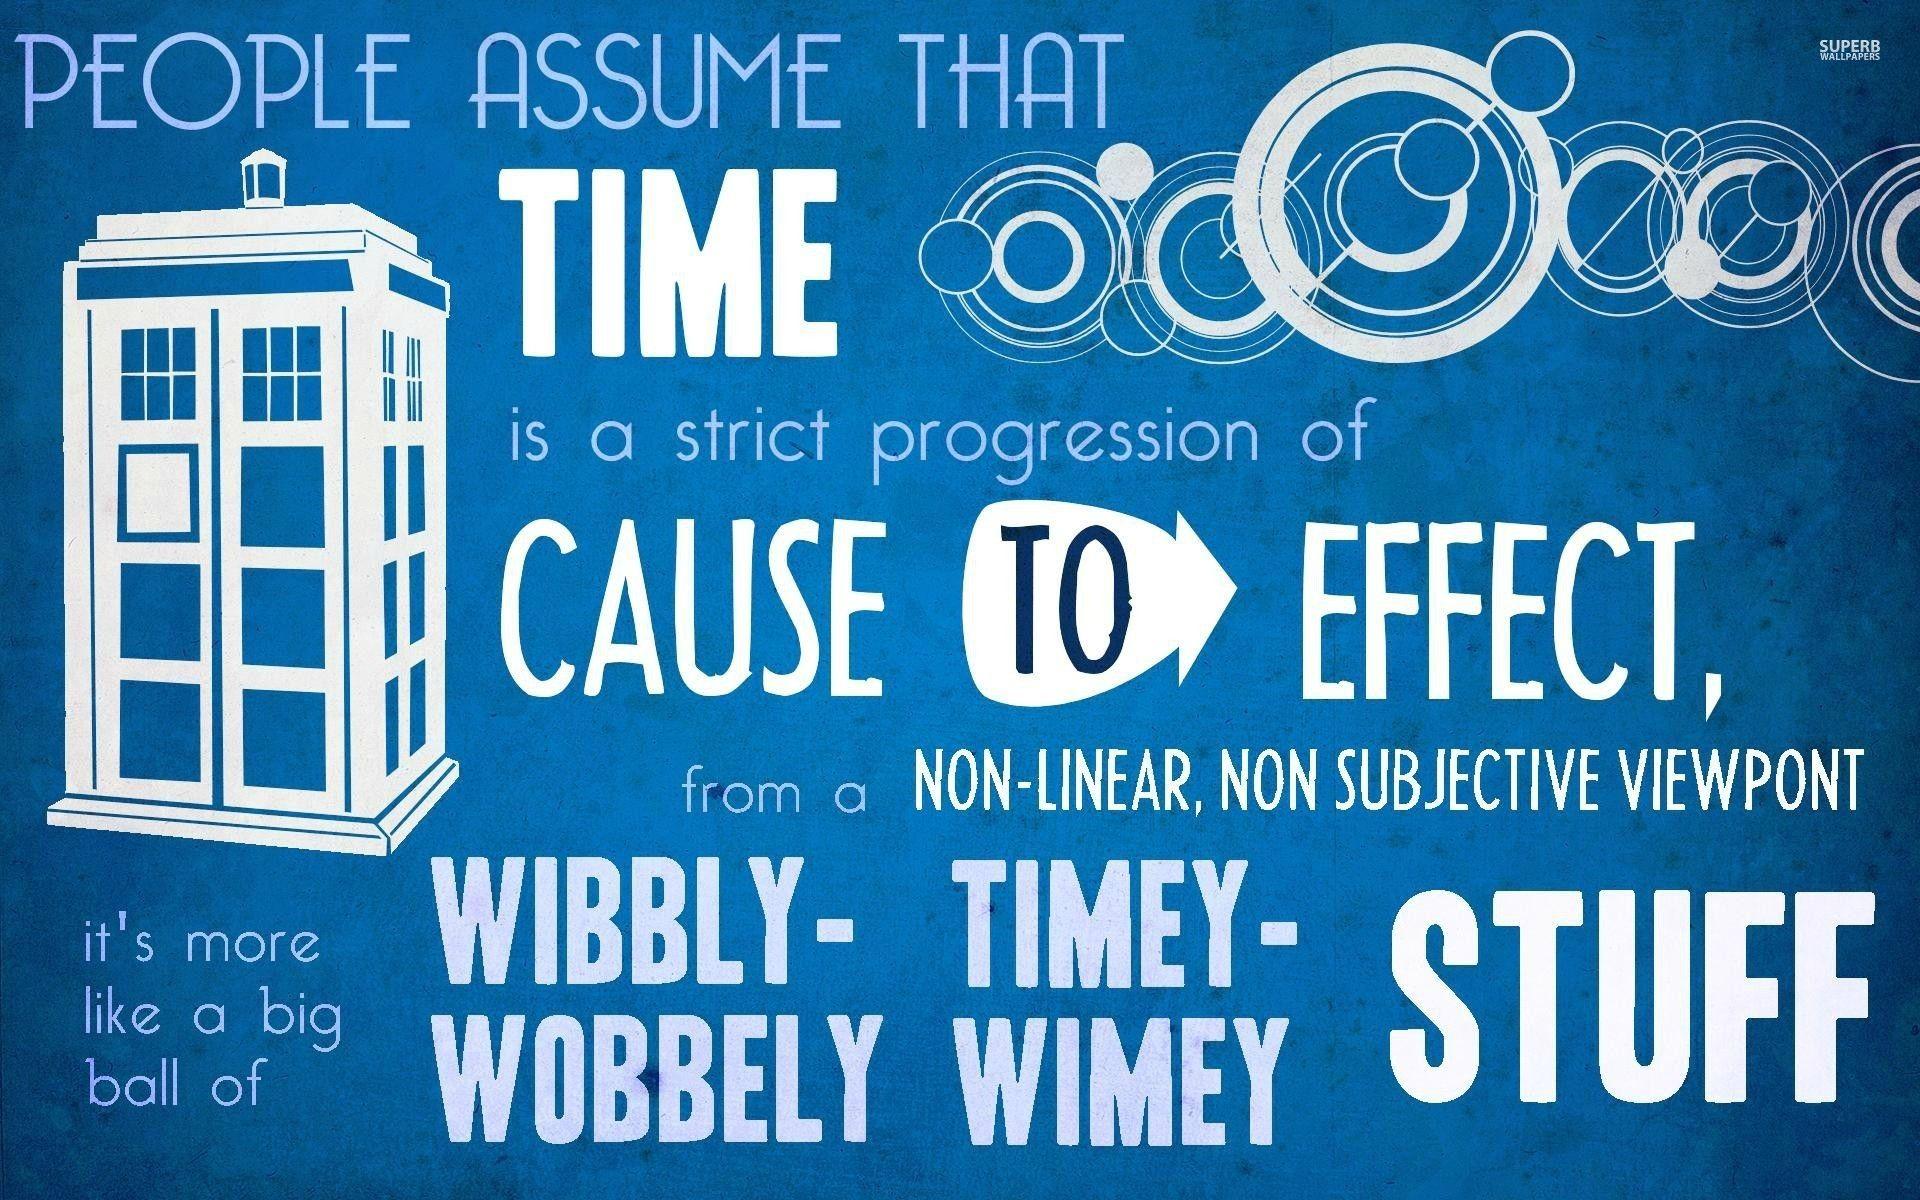 Doctor Who Wallpaper. Doctor who wallpaper, Doctor who quotes, Dr who wallpaper